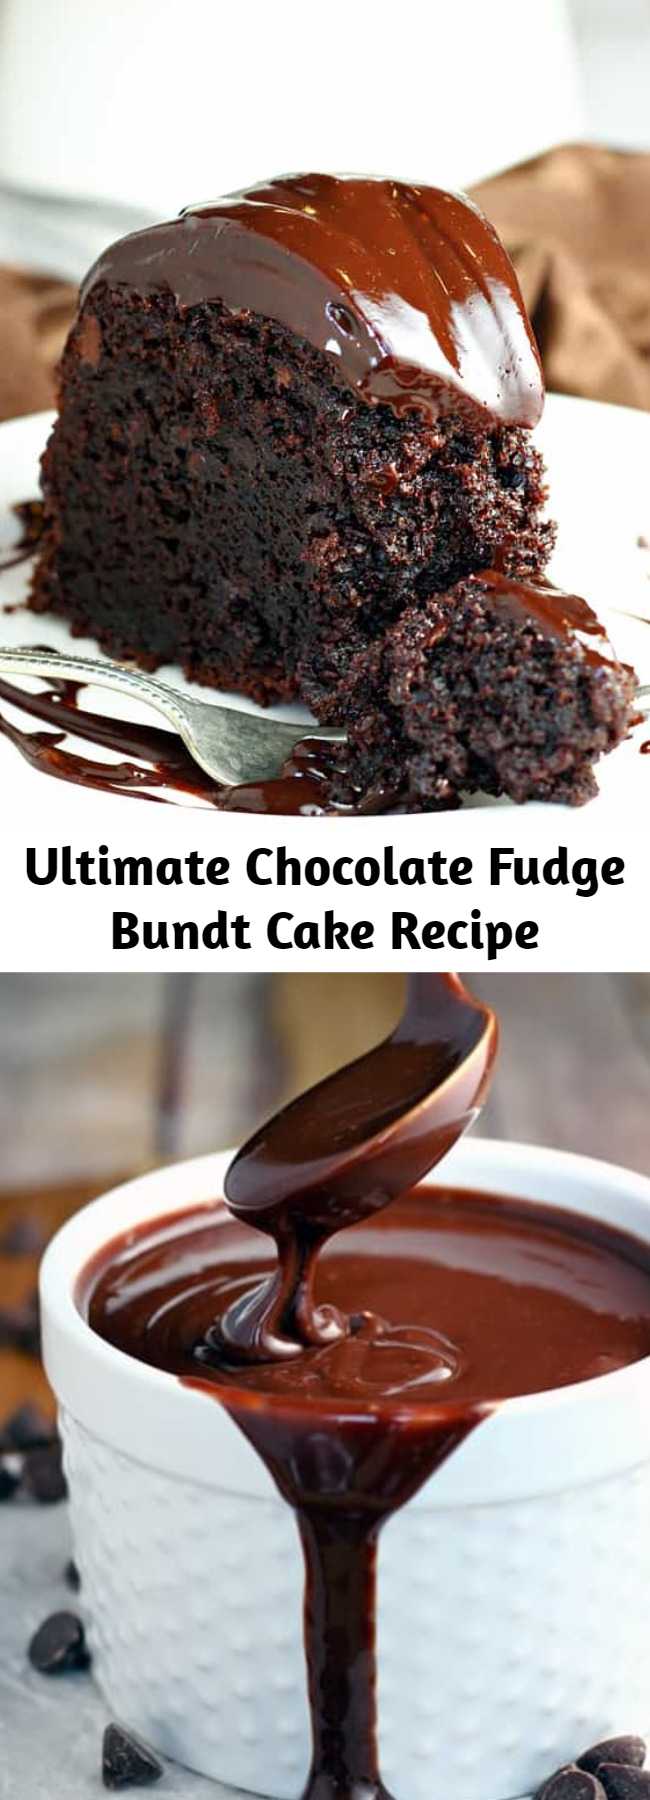 Ultimate Chocolate Fudge Bundt Cake Recipe - This amazing chocolate cake starts with a cake mix and couldn't be easier or more decadent.